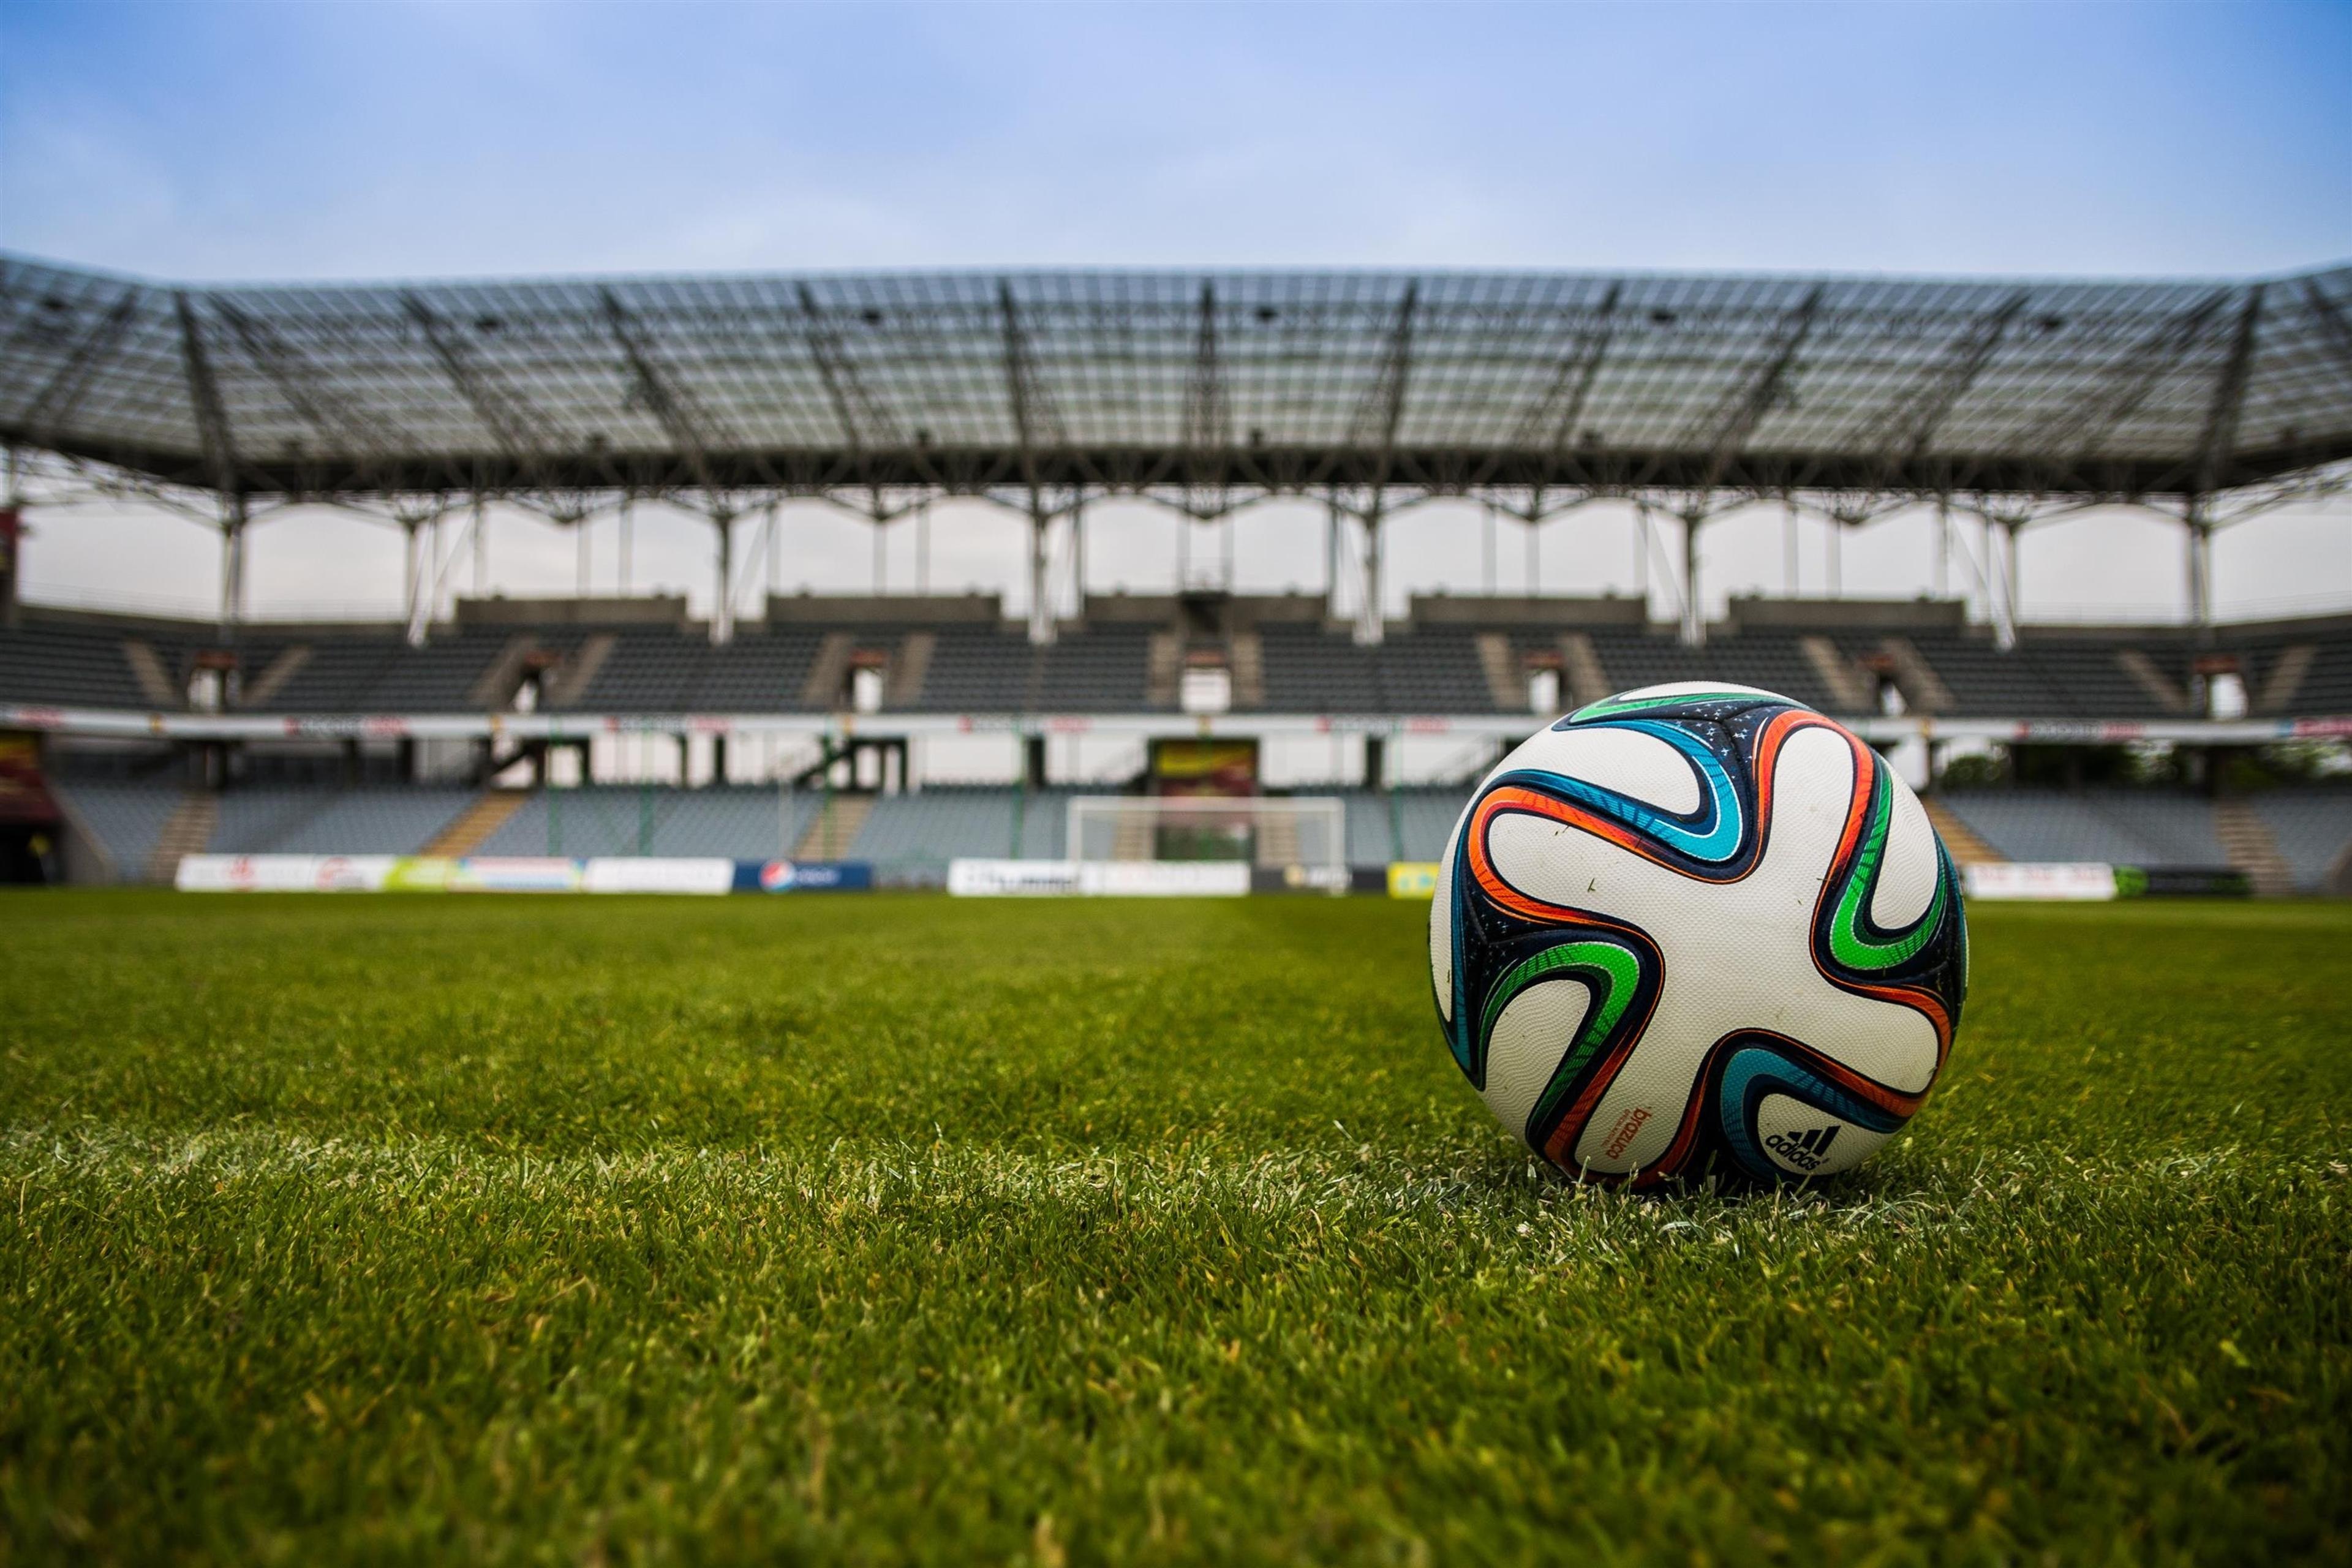 A colorful soccer ball rests on turf on an empty soccer field